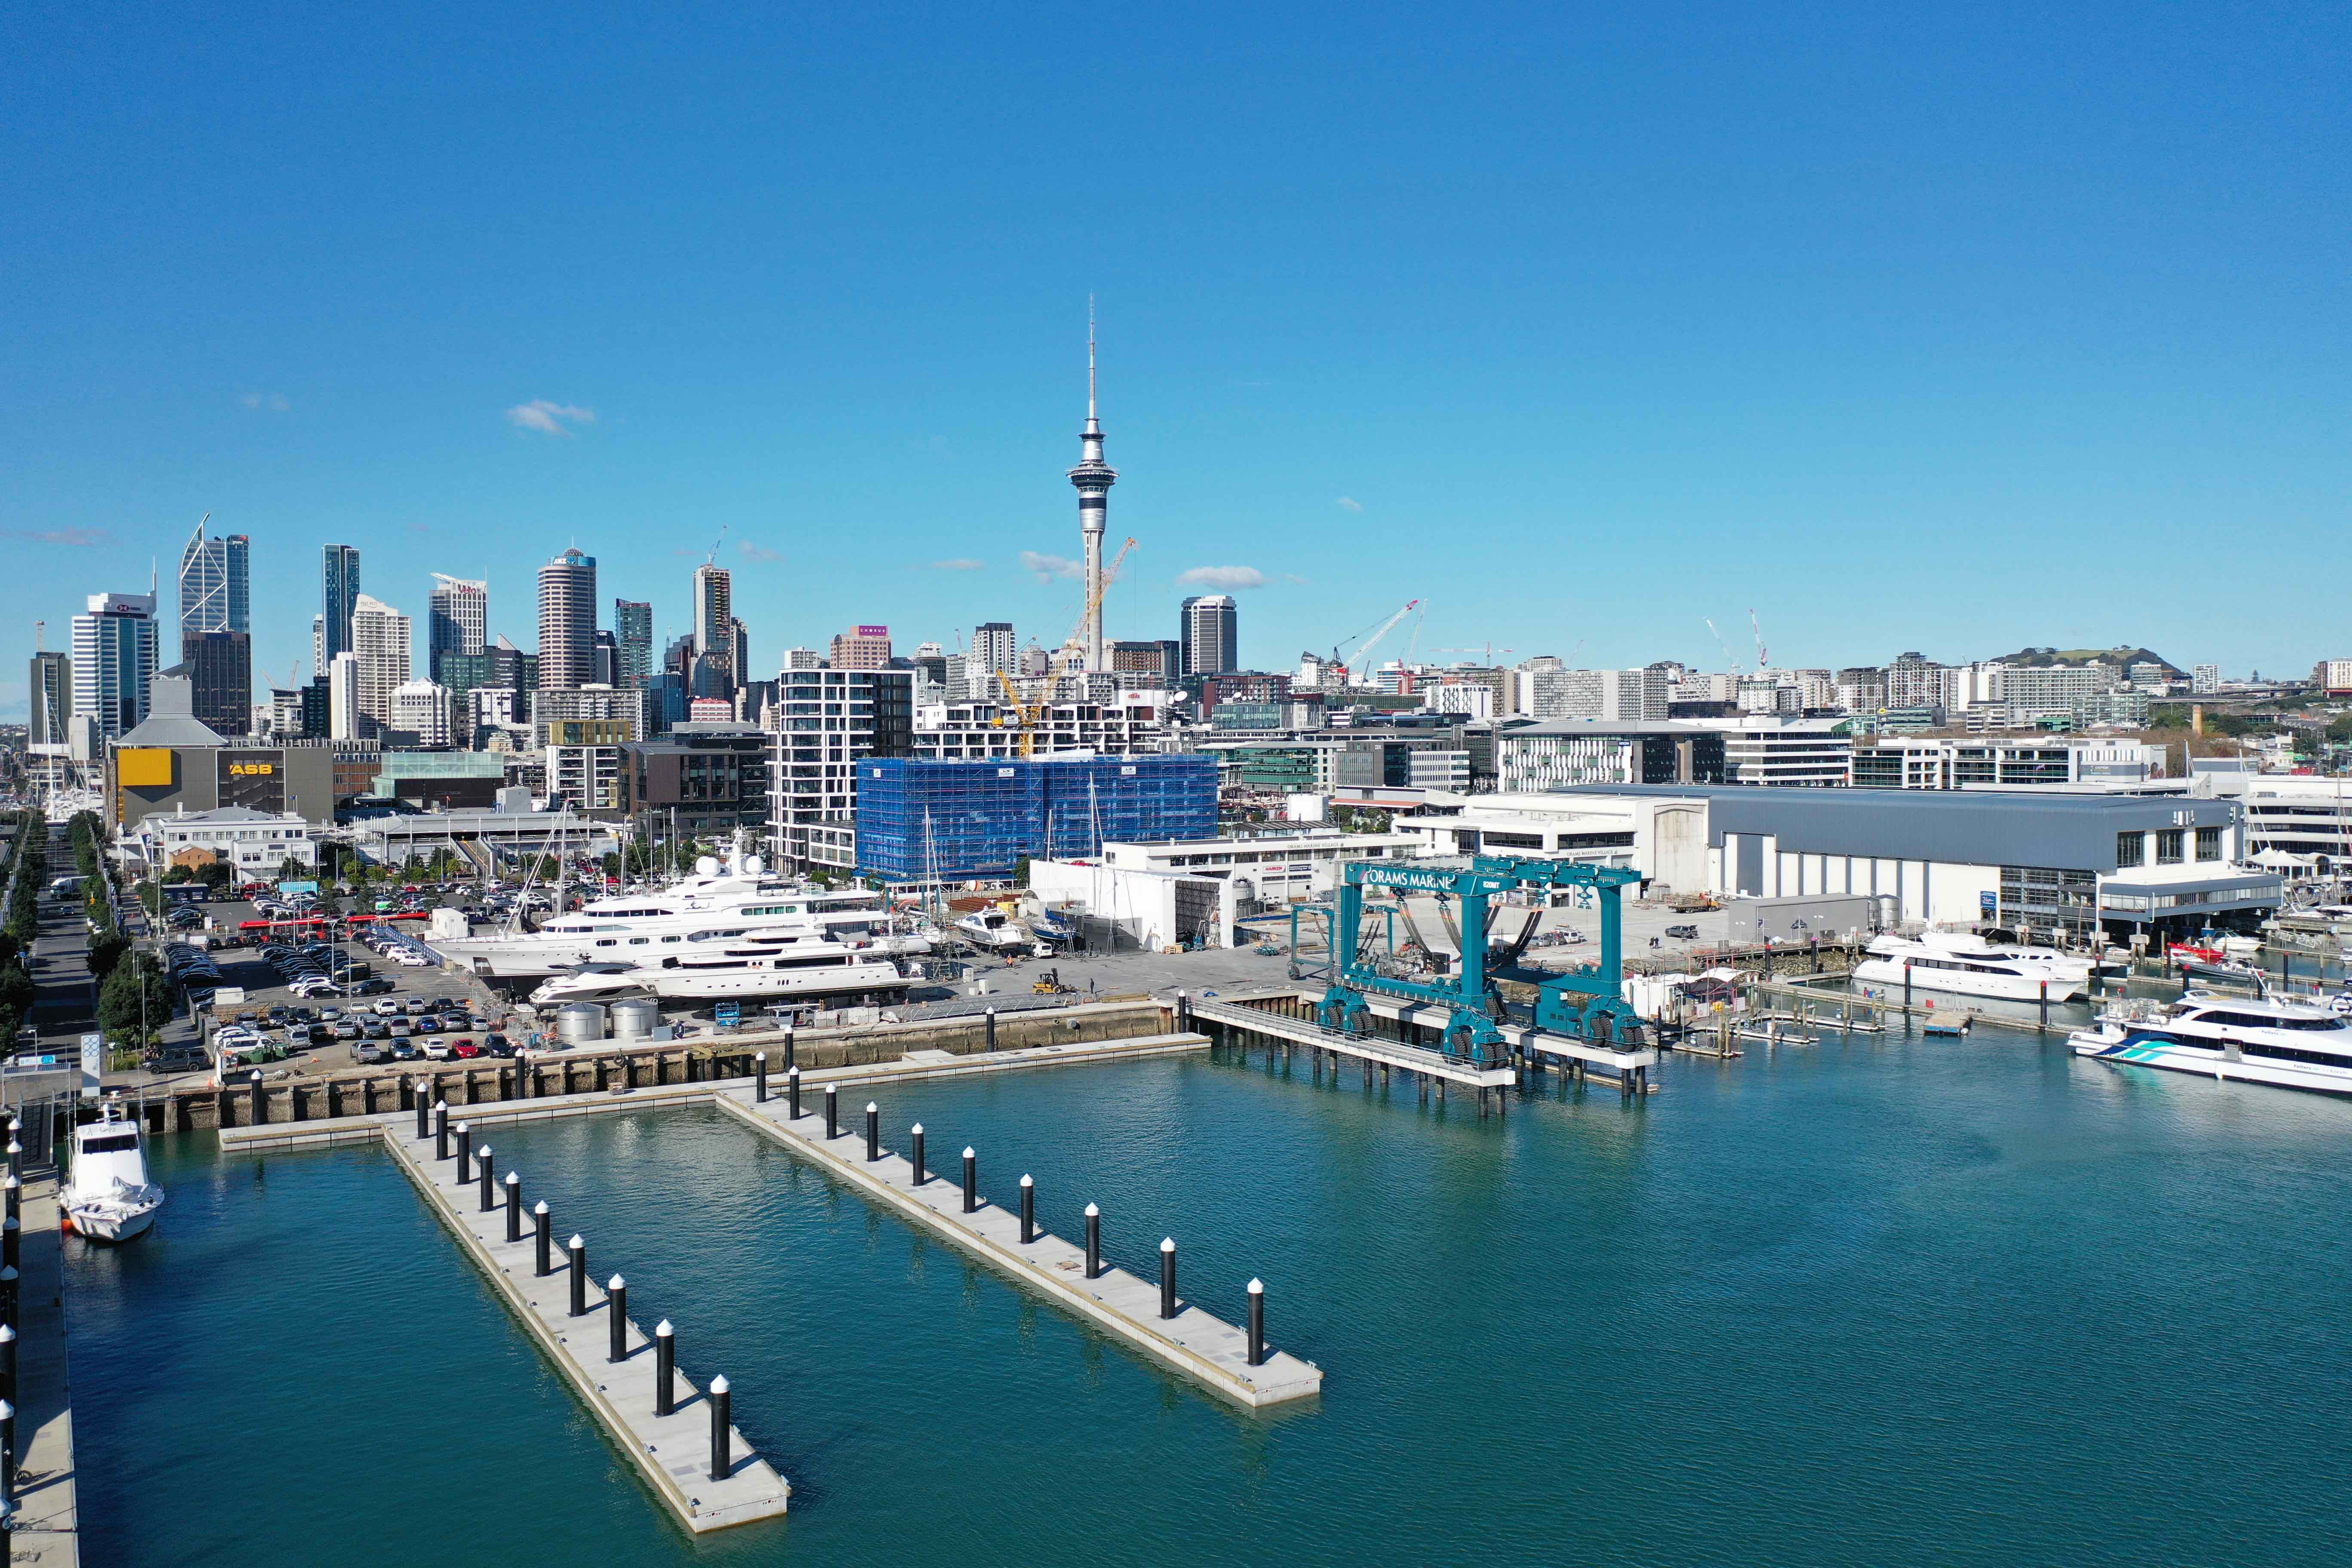 Orams Marine Sits In The Heart Of Auckland's CBD